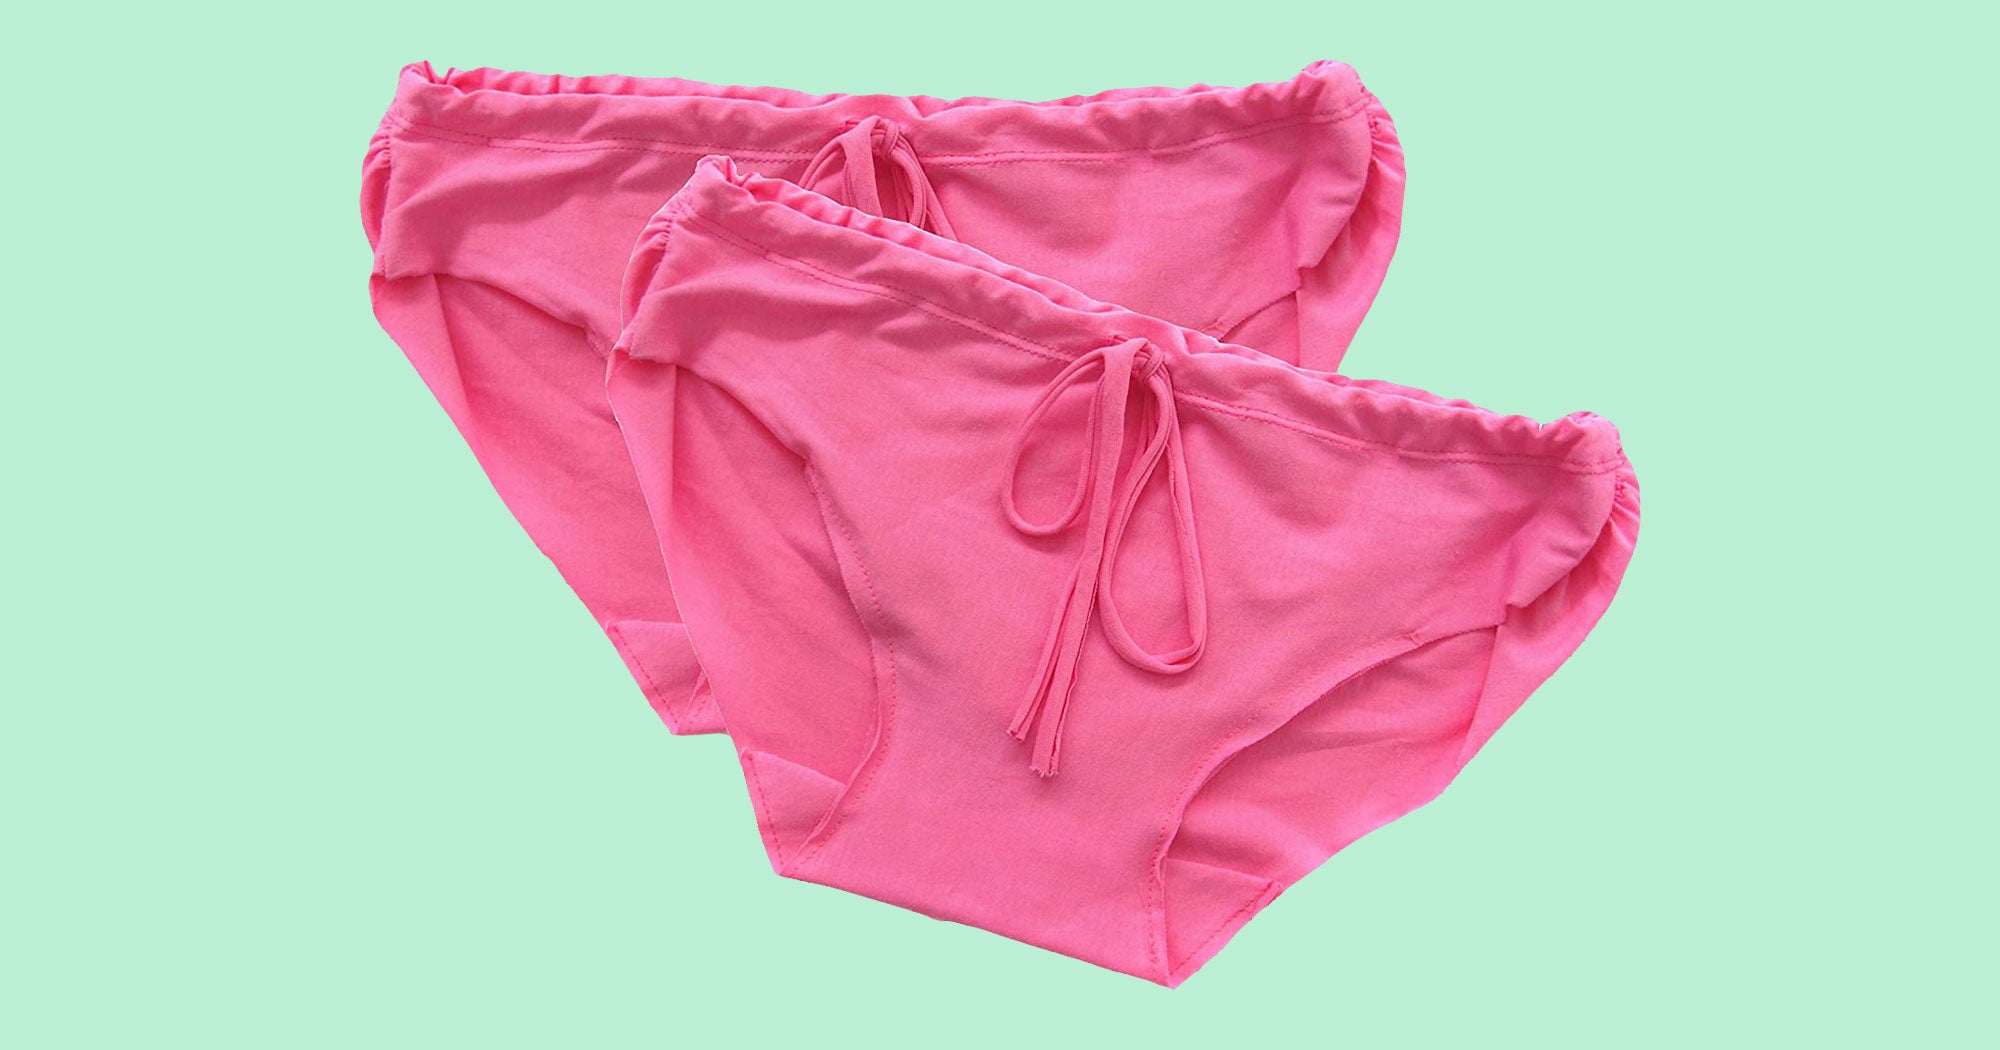 Disposable Underwear - Postpartum Support for New Moms – Brief Transitions